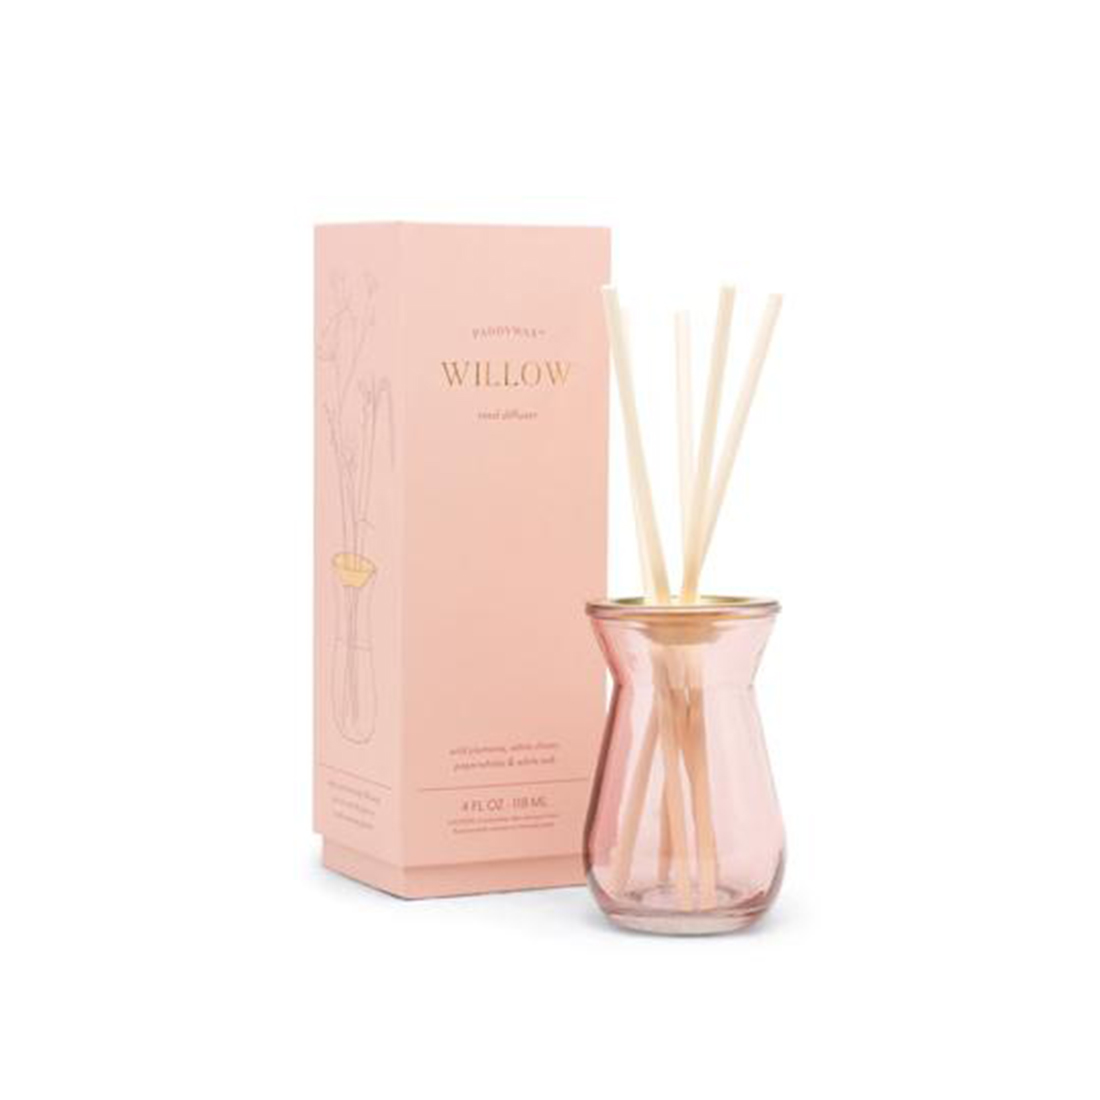 paddywax floral 4oz diffuser pink willow 87104